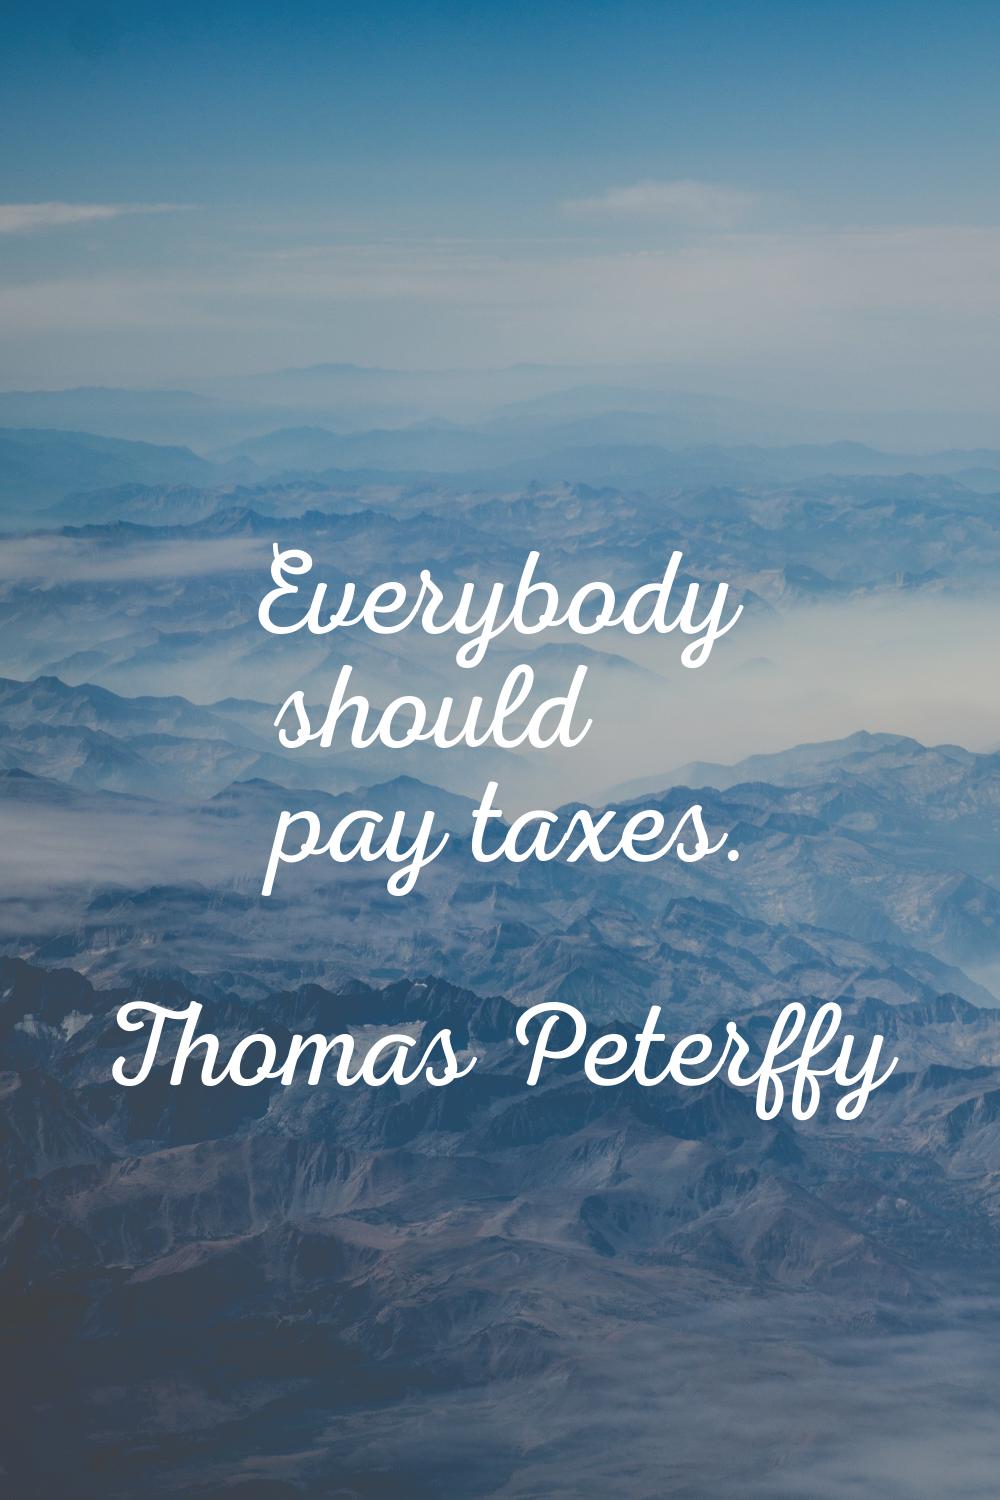 Everybody should pay taxes.